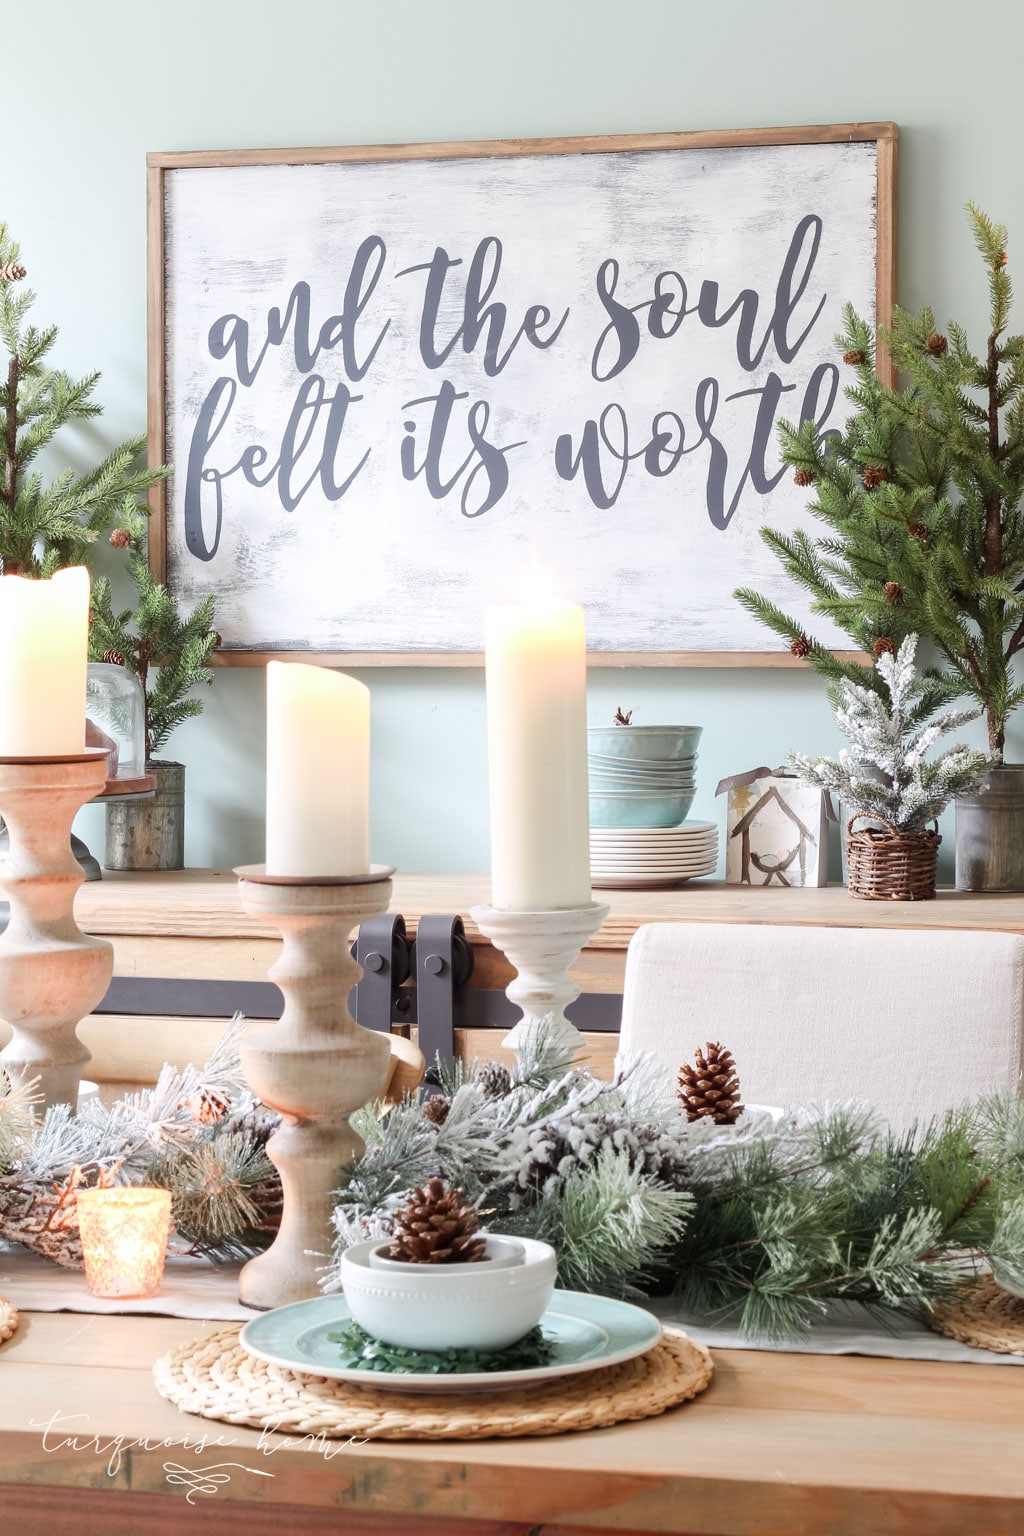 "And the soul felt its worth" DIY large wooden sign for Christmas and winter